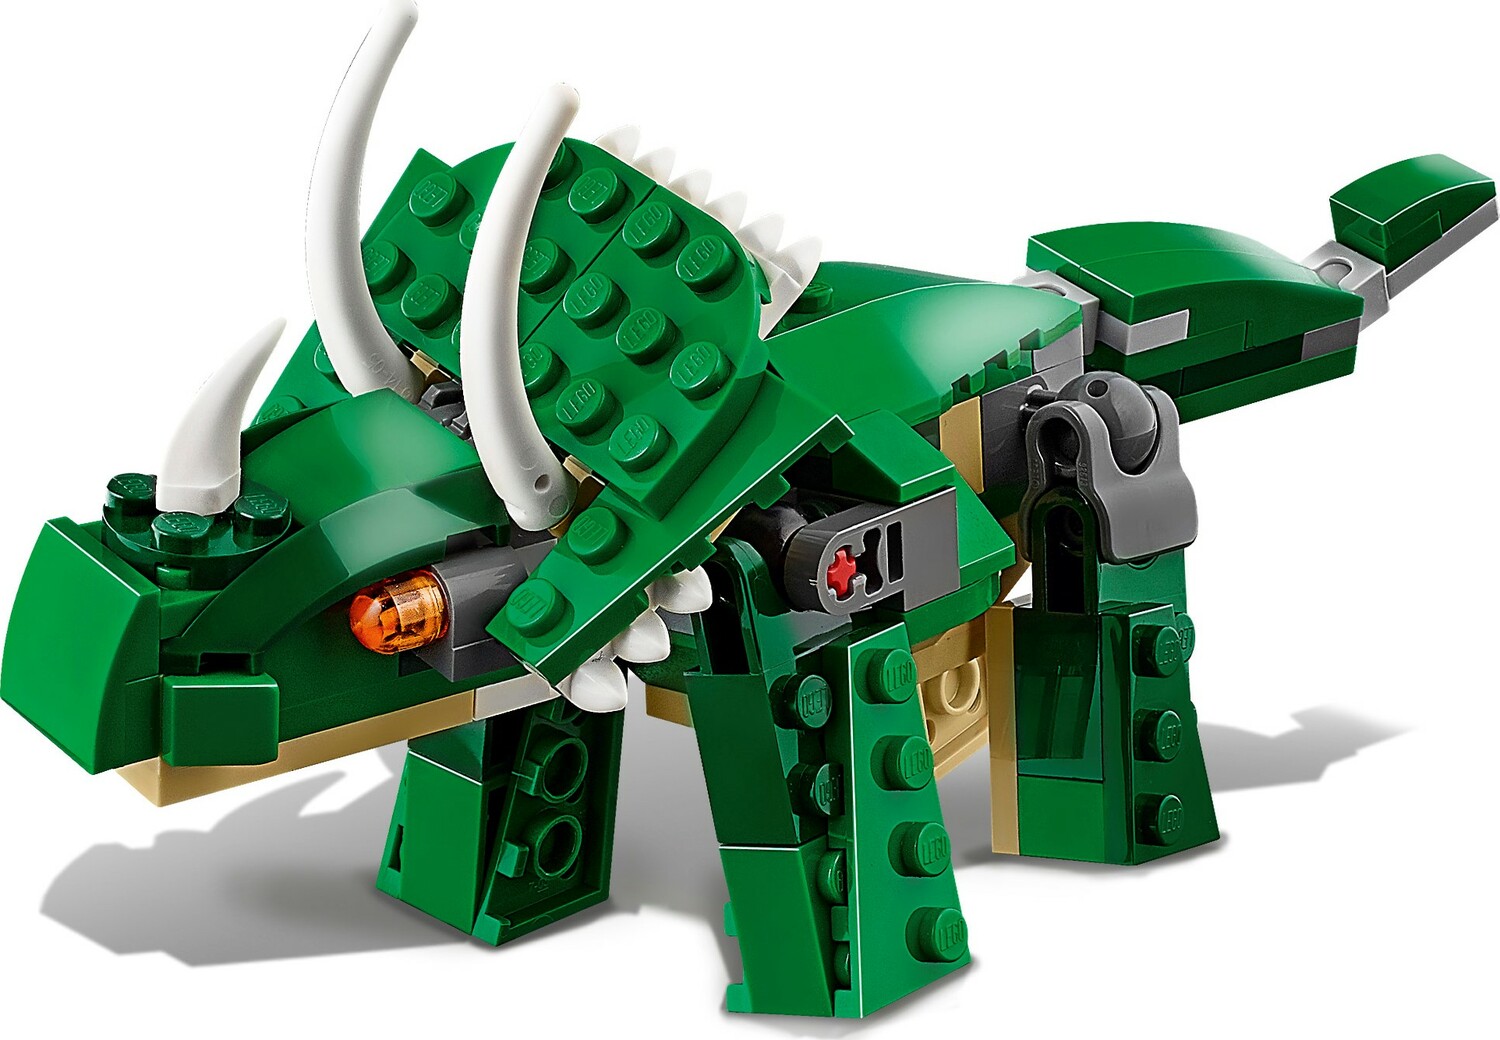 LEGO 31058 Mighty Dinosaurs (Creator 3-in-1) - Kite and Kaboodle